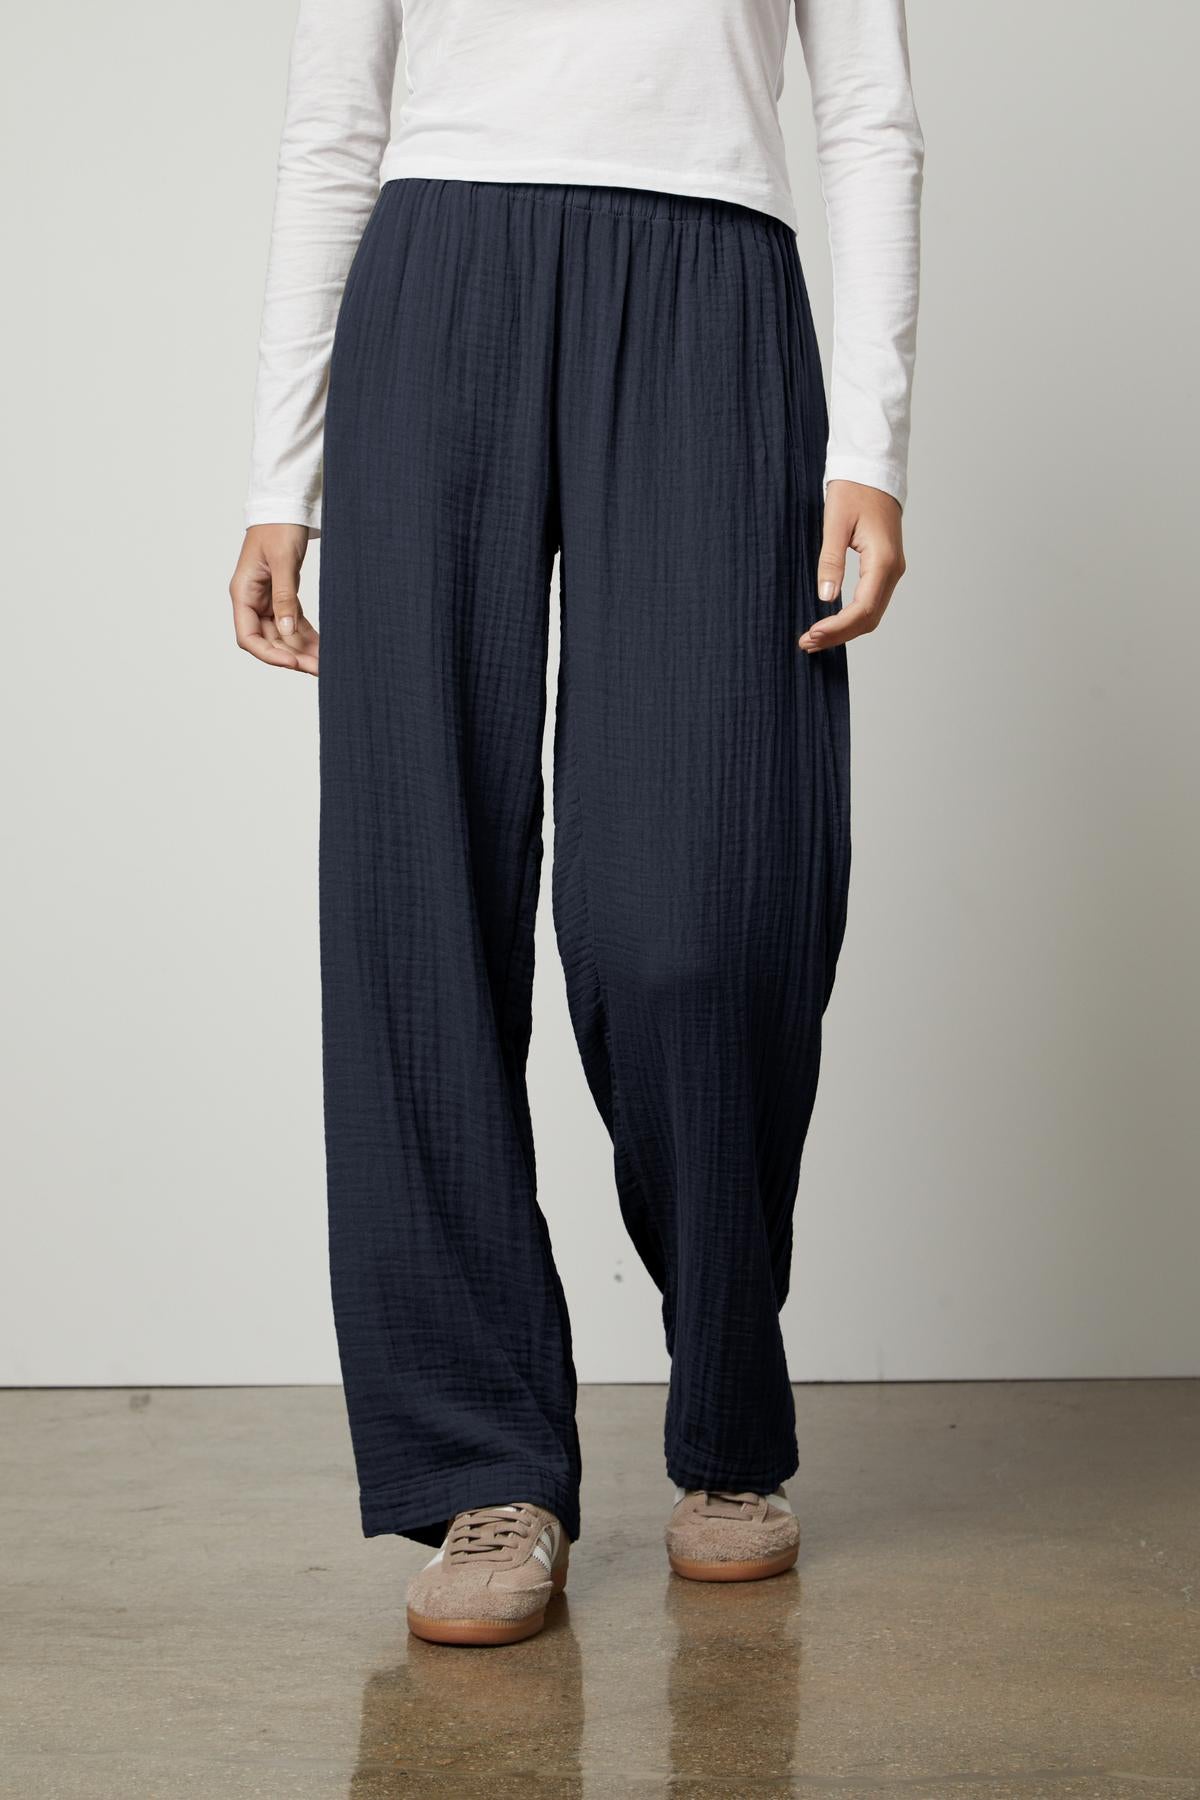 Woman standing in the Velvet by Graham & Spencer JERRY COTTON GAUZE PANT with an elastic waistband and white top, with hands slightly touching the pockets, paired with brown shoes.-36462884978881